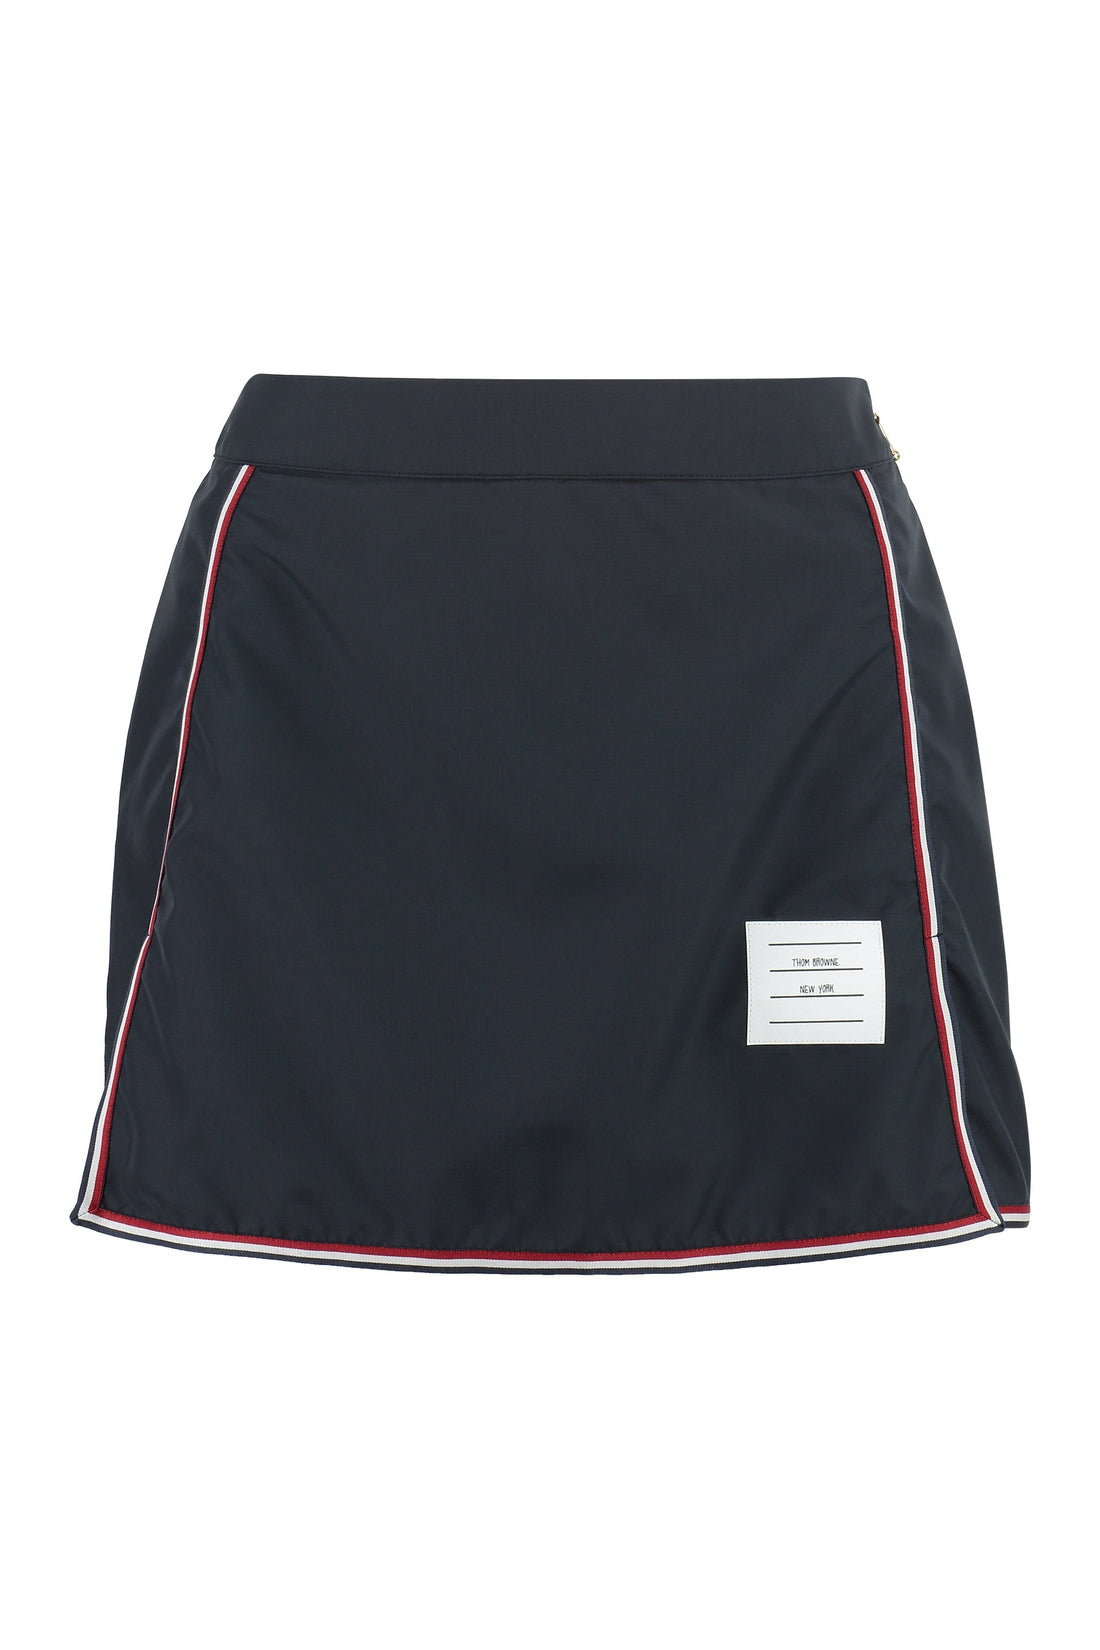 Thom Browne-OUTLET-SALE-Technical fabric mini-skirt-ARCHIVIST